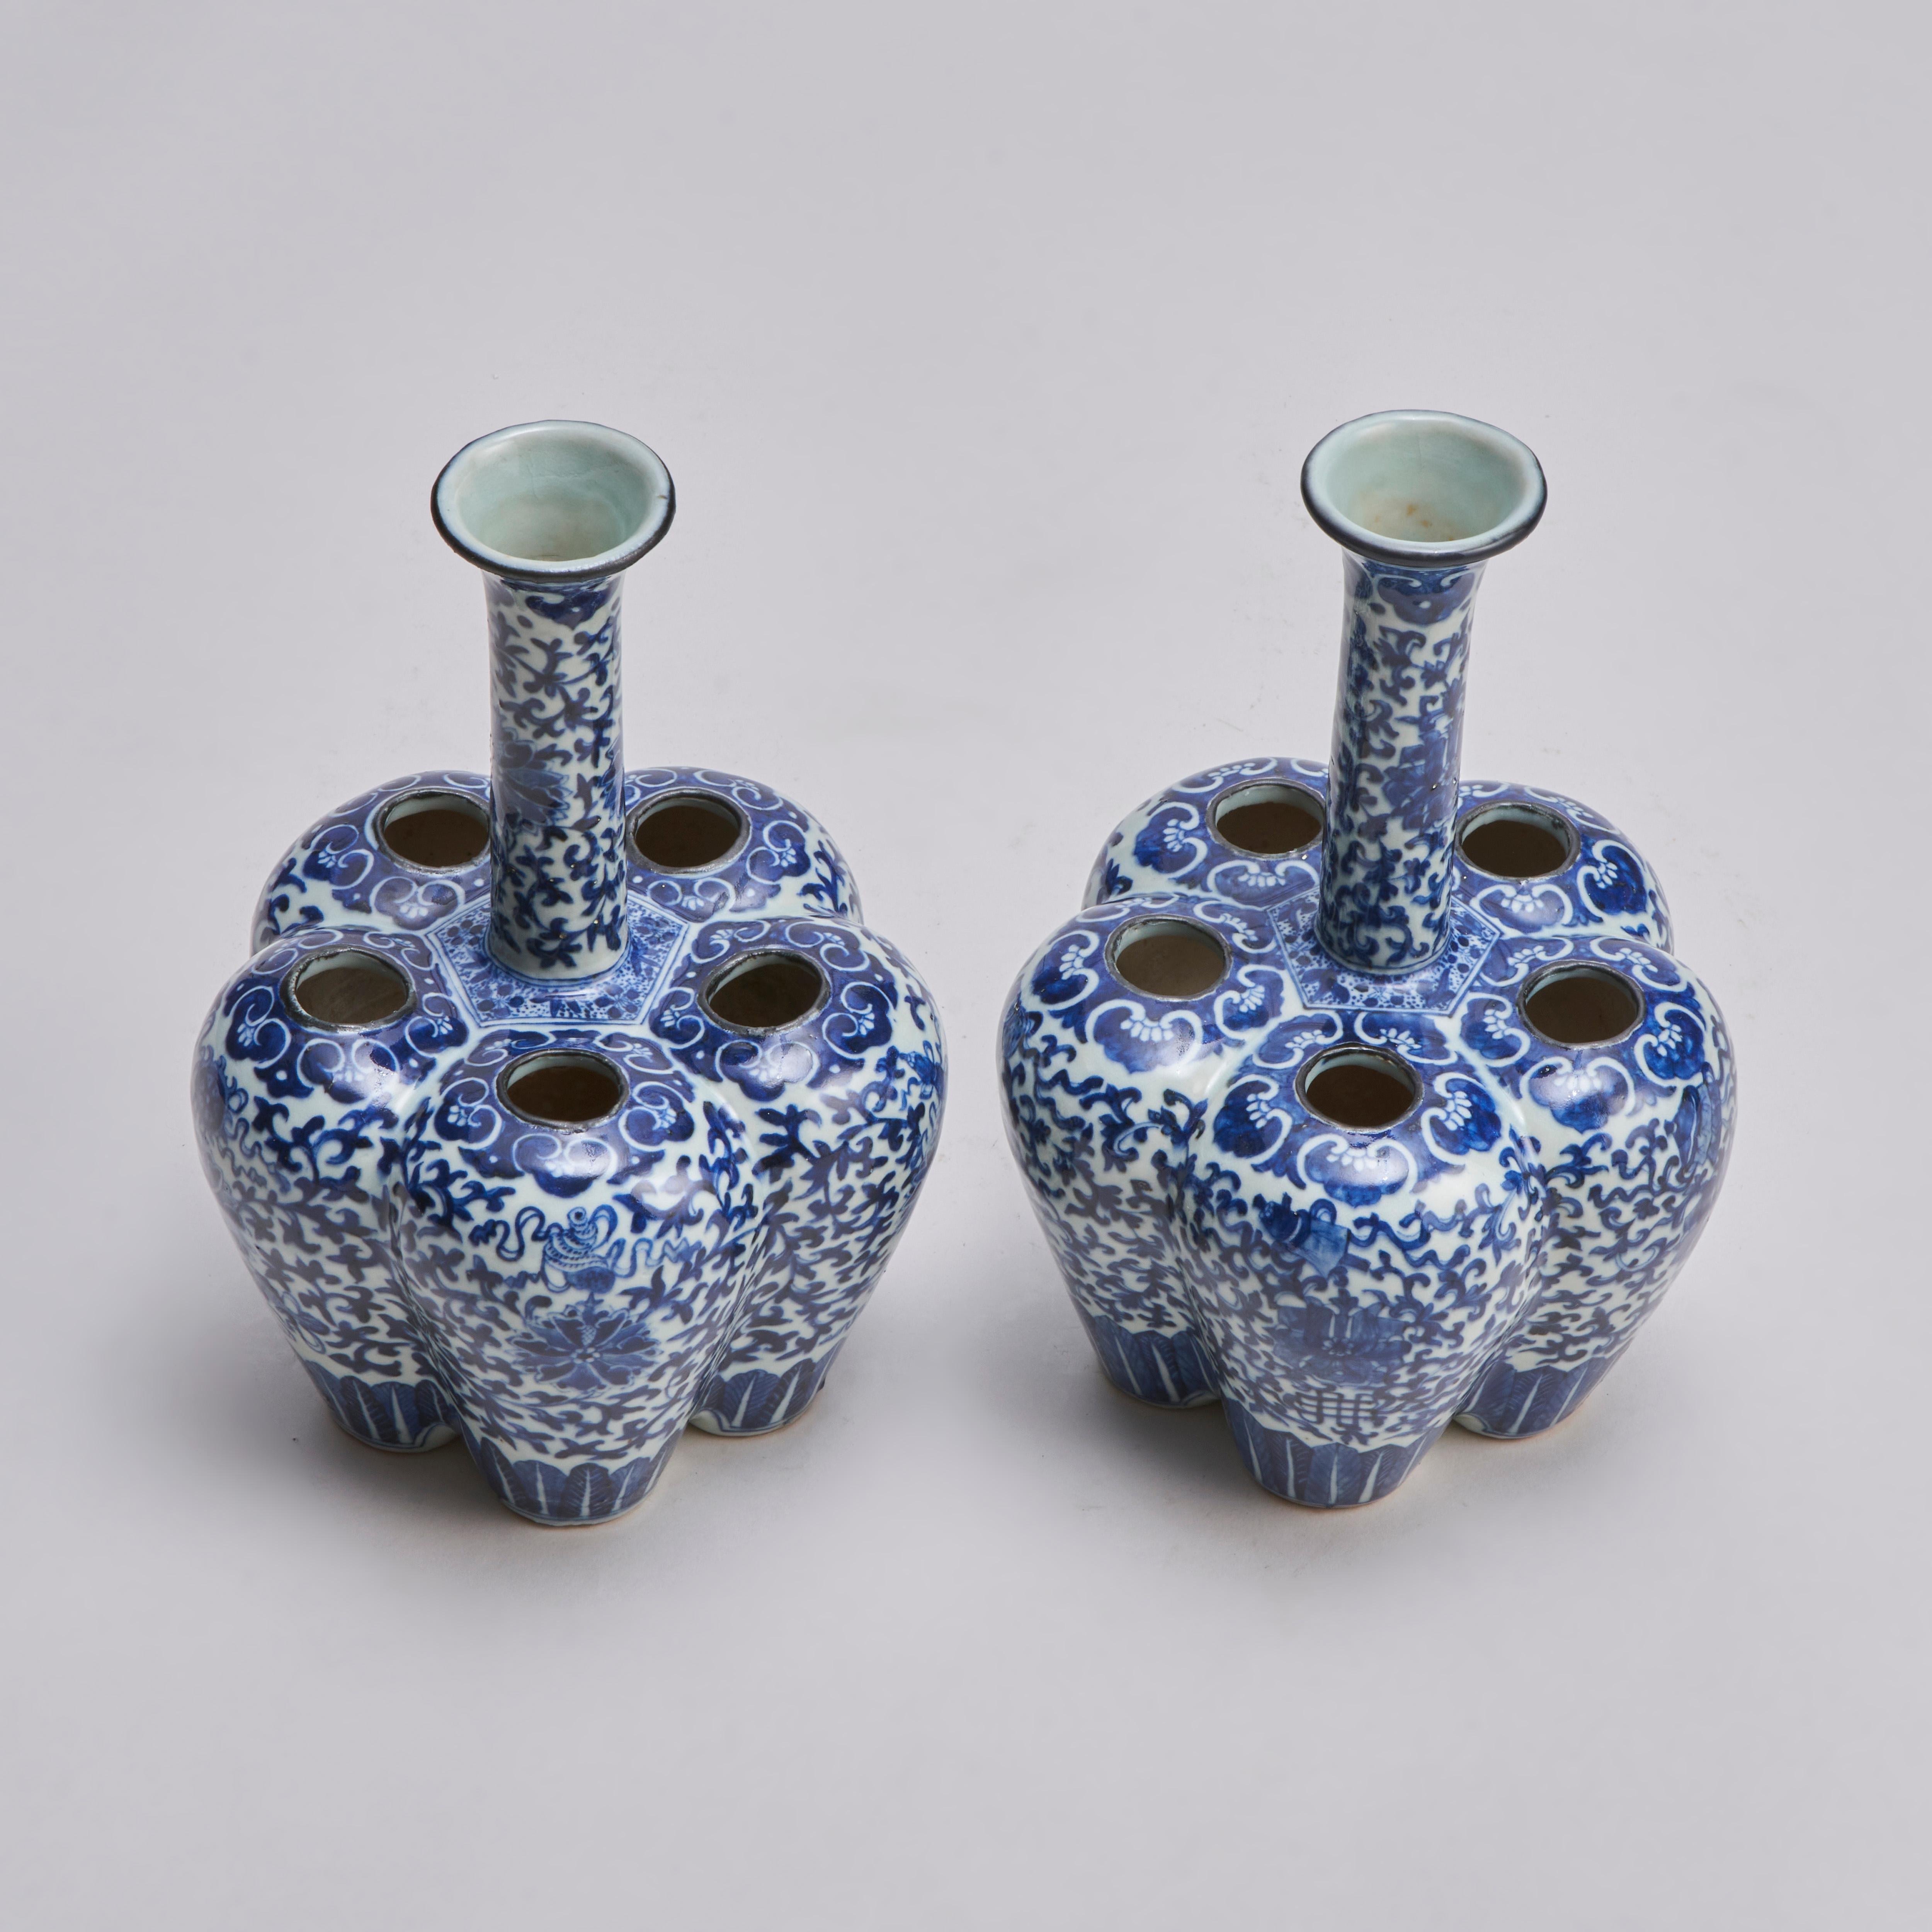 A pair of 19th century Chinese blue and white crocus vases formed of five smaller vases around a central neck with a flared rim. Decorated with clematis flowers on a foliate backgound with ruyi borders.

Contact us for further information, images or